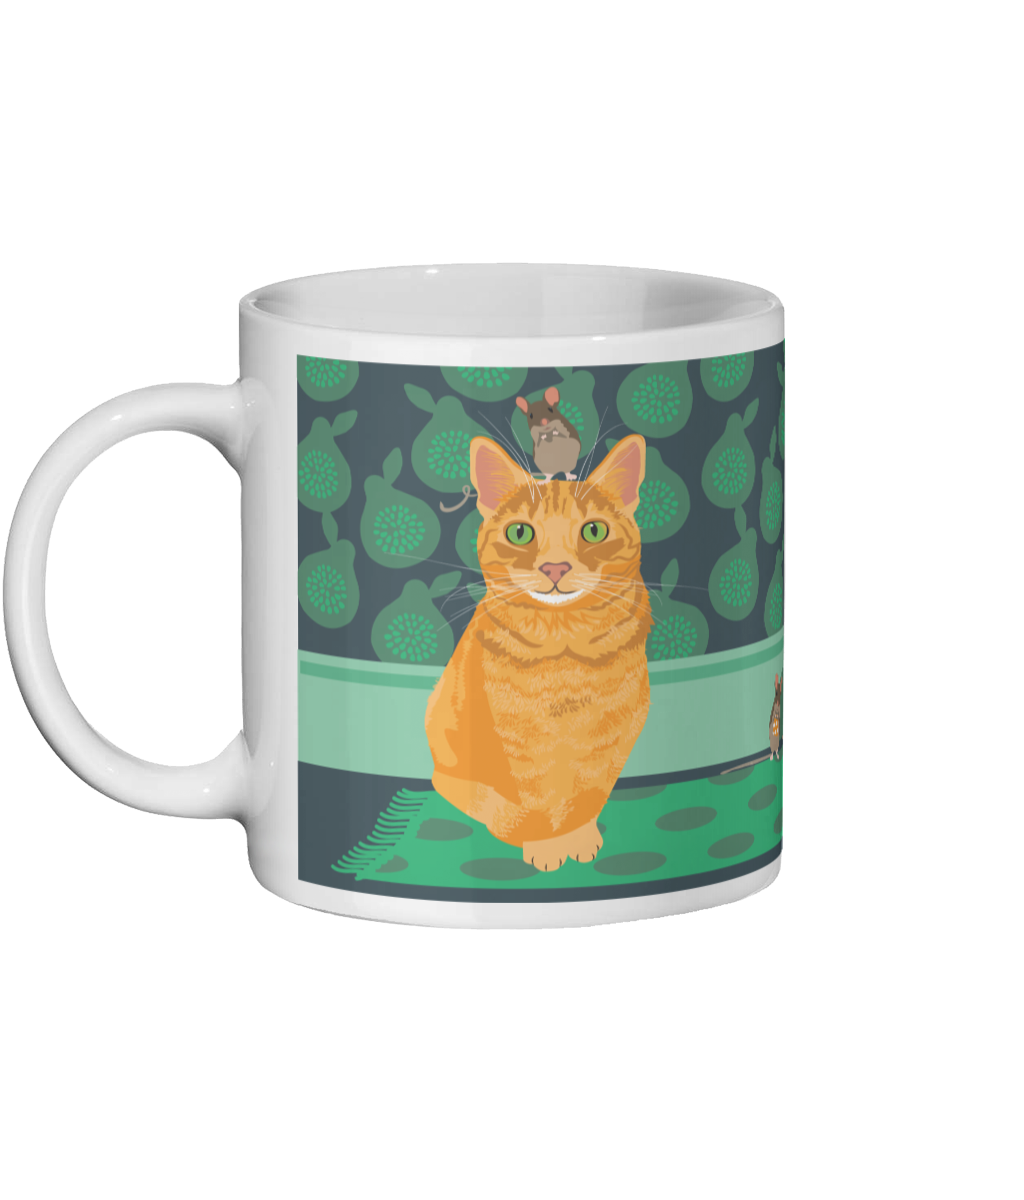 Ginger Cat and Mouse Ceramic Mug by Al Stafford